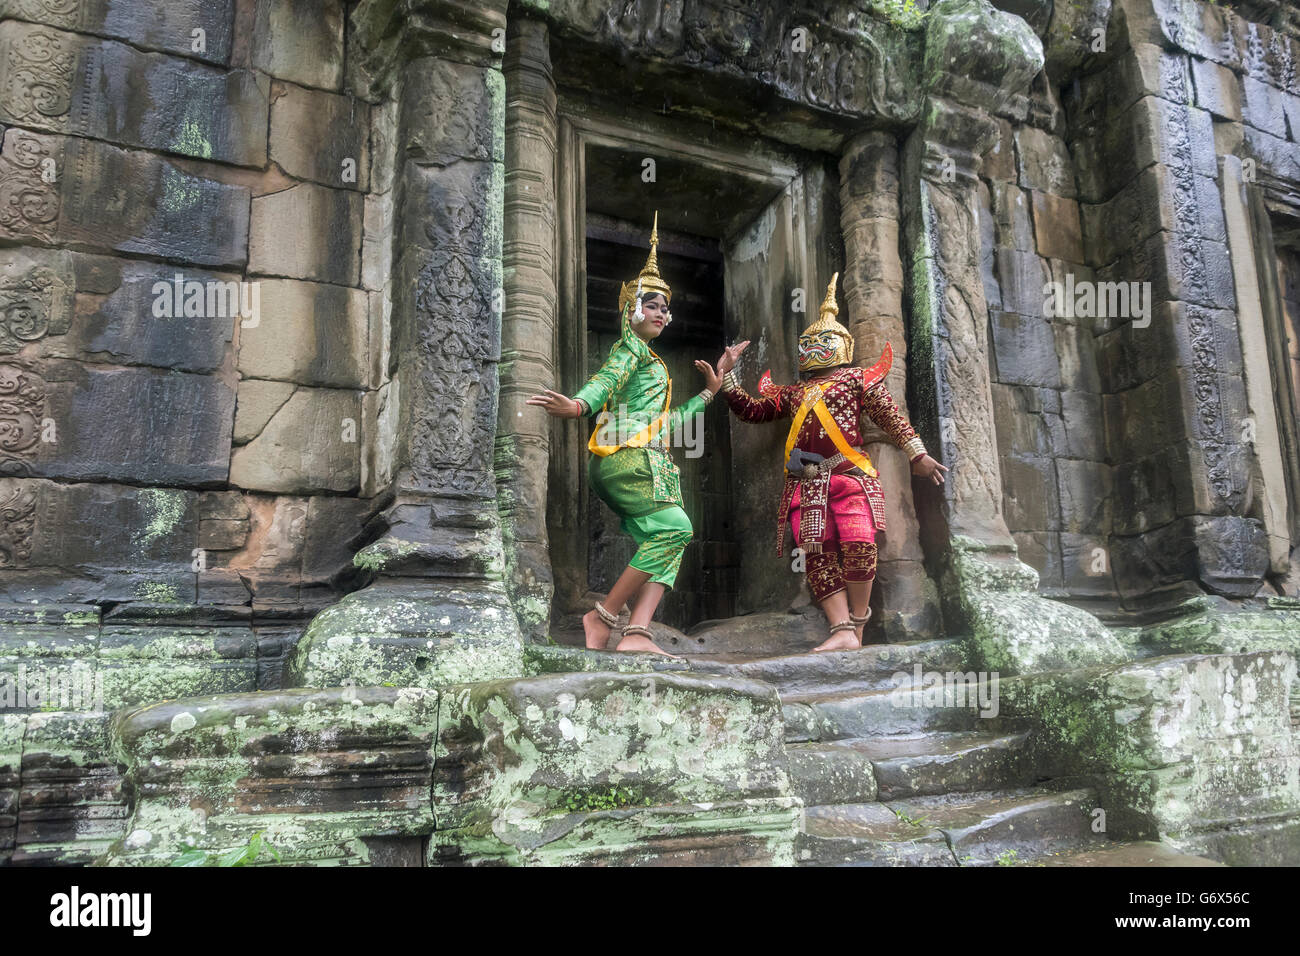 Khmer classical dancers, Ngoh and ogre characters on the Terrace of the Elephants, Angkor Thom, Cambodia Stock Photo